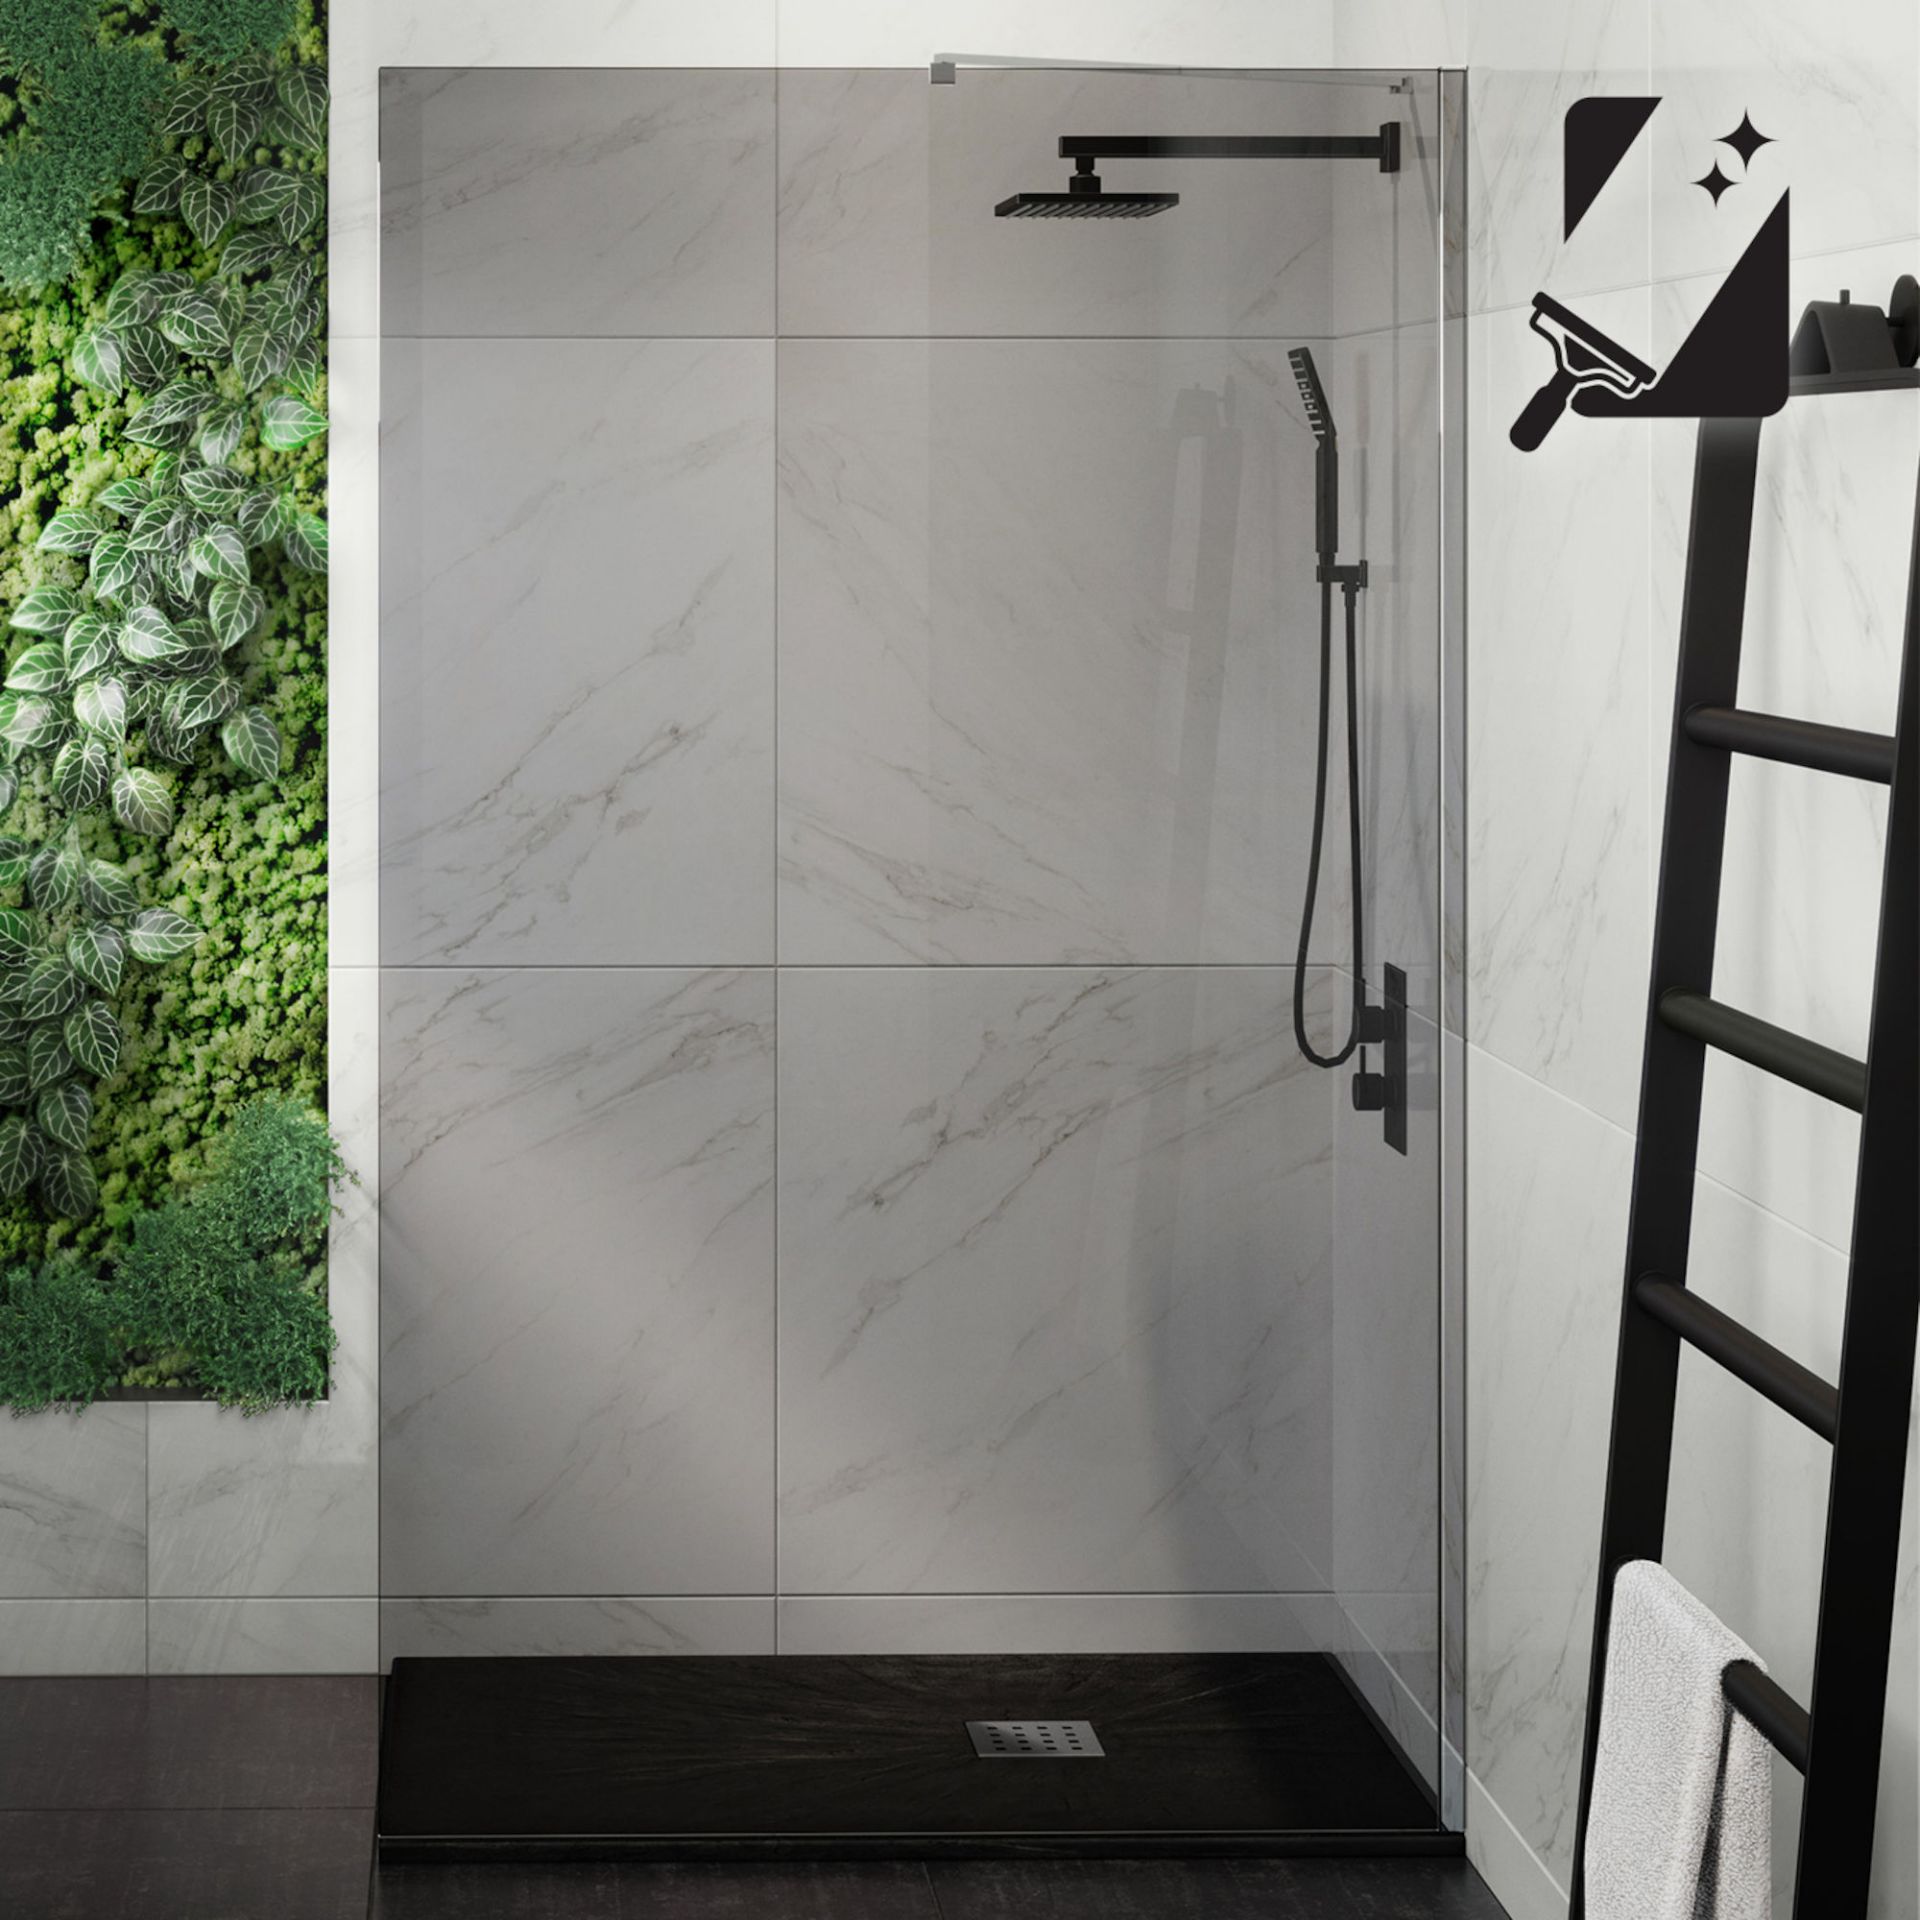 (RR6) 1200mm - 8mm Designer EasyClean Smoked Glass Wetroom Panel. RRP £499.99. Stylish smoked ... (